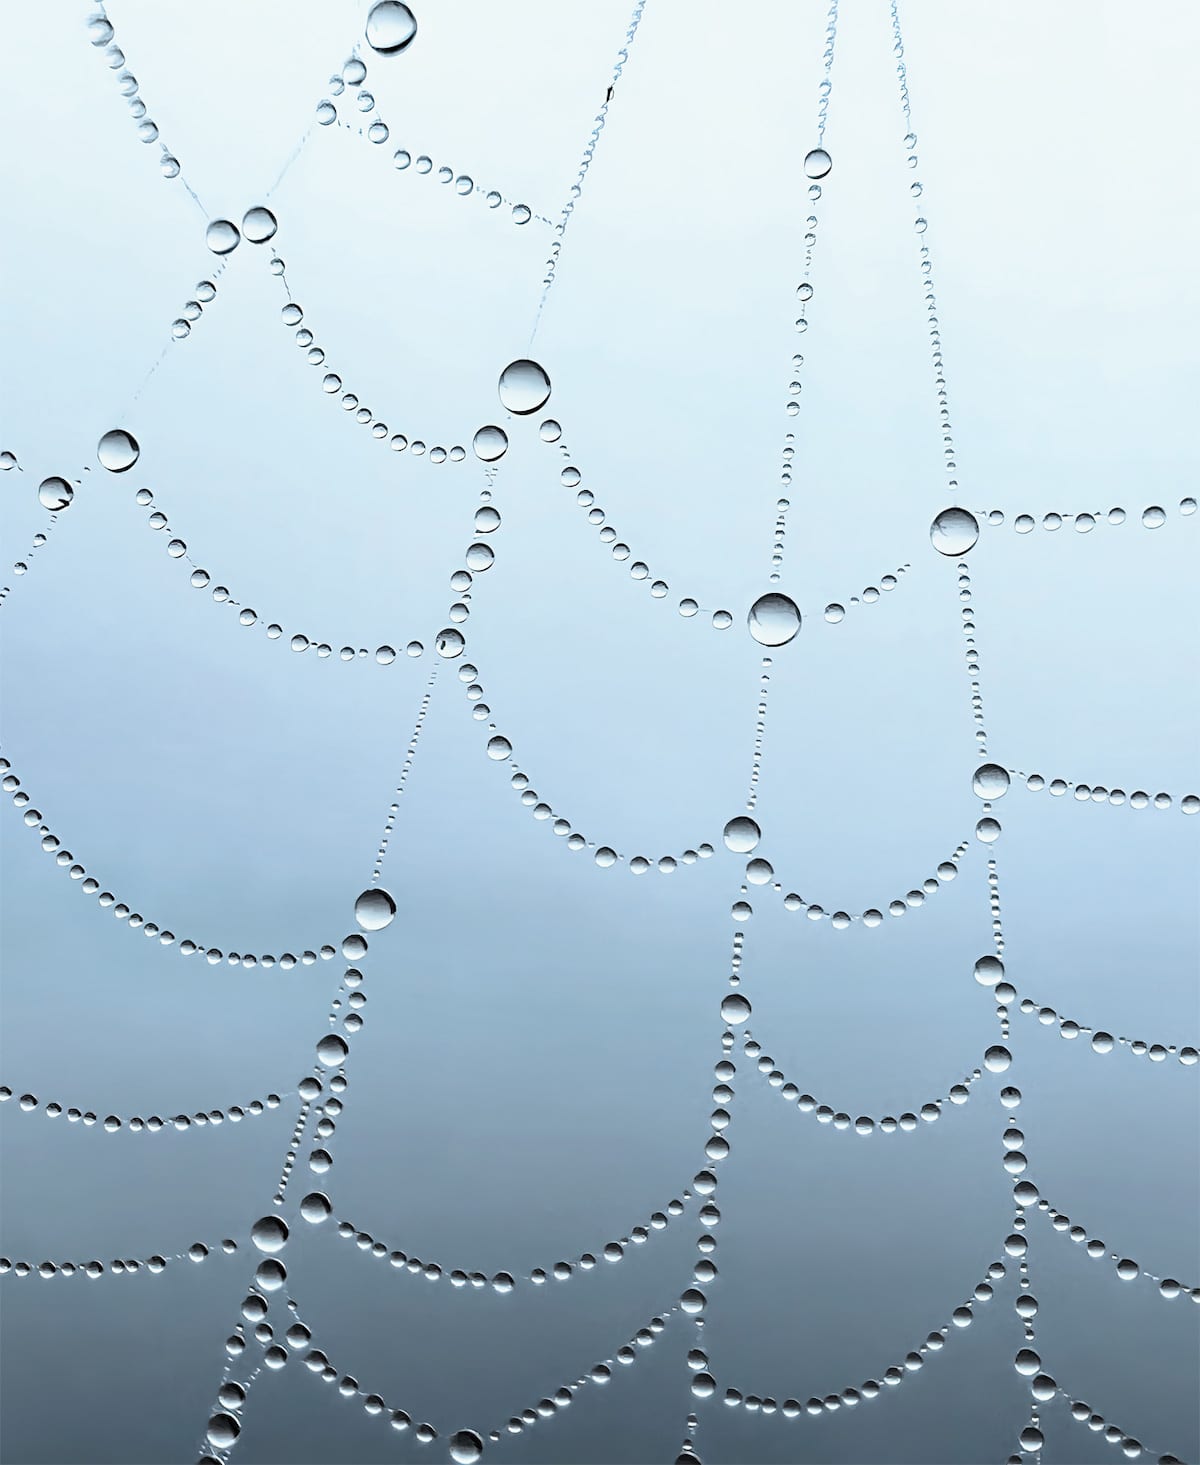 Macro Photo of Dewdrops on a Spiderweb